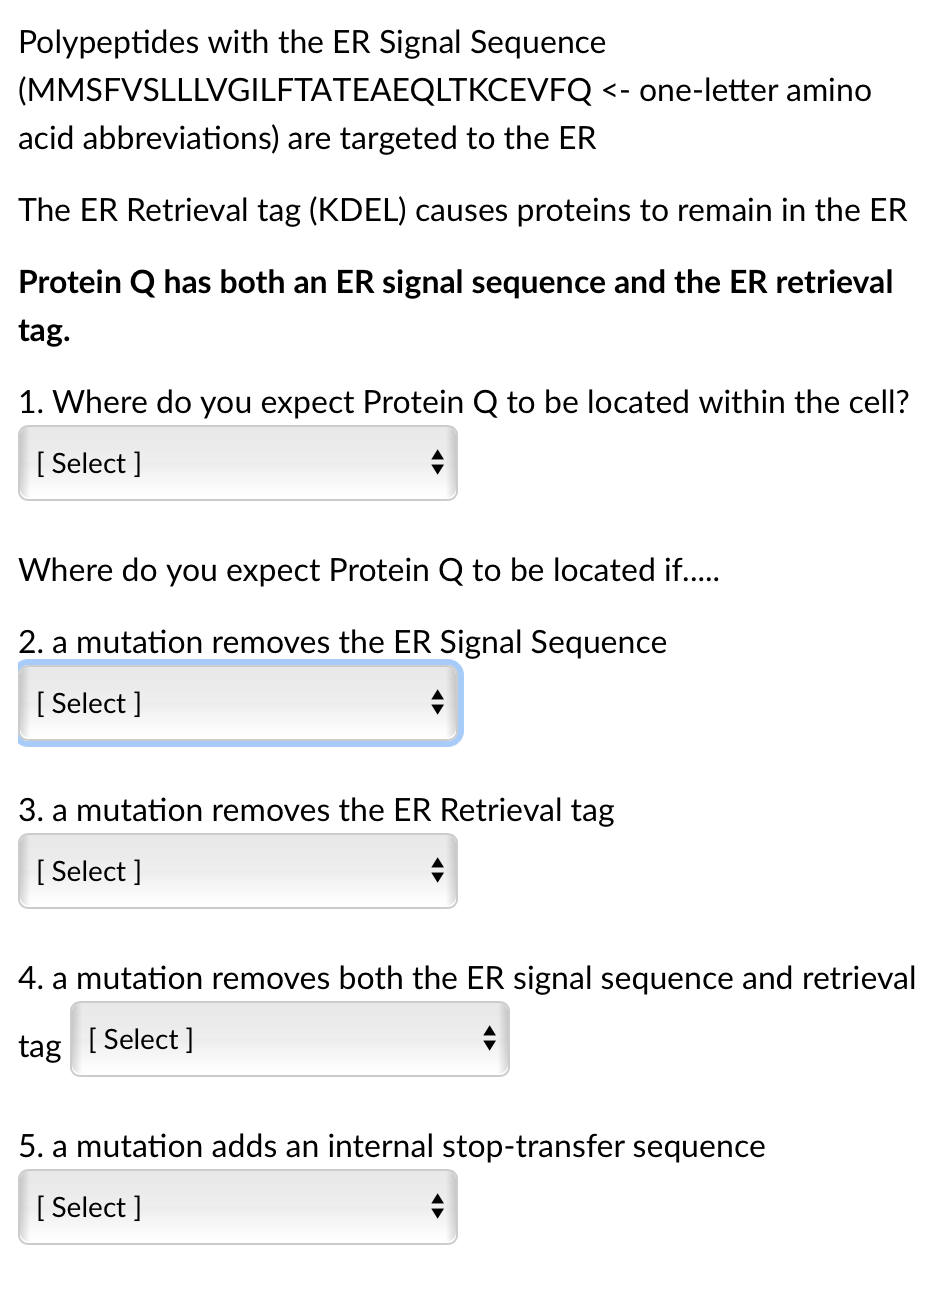 Polypeptides with the ER Signal Sequence
(MMSFVSLLLVGILFTATEAEQLTKCEVFQ <- one-letter amino
acid abbreviations) are targeted to the ER
The ER Retrieval tag (KDEL) causes proteins to remain in the ER
Protein Q has both an ER signal sequence and the ER retrieval
tag.
1. Where do you expect Protein Q to be located within the cell?
[ Select ]
Where do you expect Protein Q to be located if..
2. a mutation removes the ER Signal Sequence
[ Select ]
3. a mutation removes the ER Retrieval tag
[ Select ]
4. a mutation removes both the ER signal sequence and retrieval
tag [ Select ]
5. a mutation adds an internal stop-transfer sequence
[ Select ]
